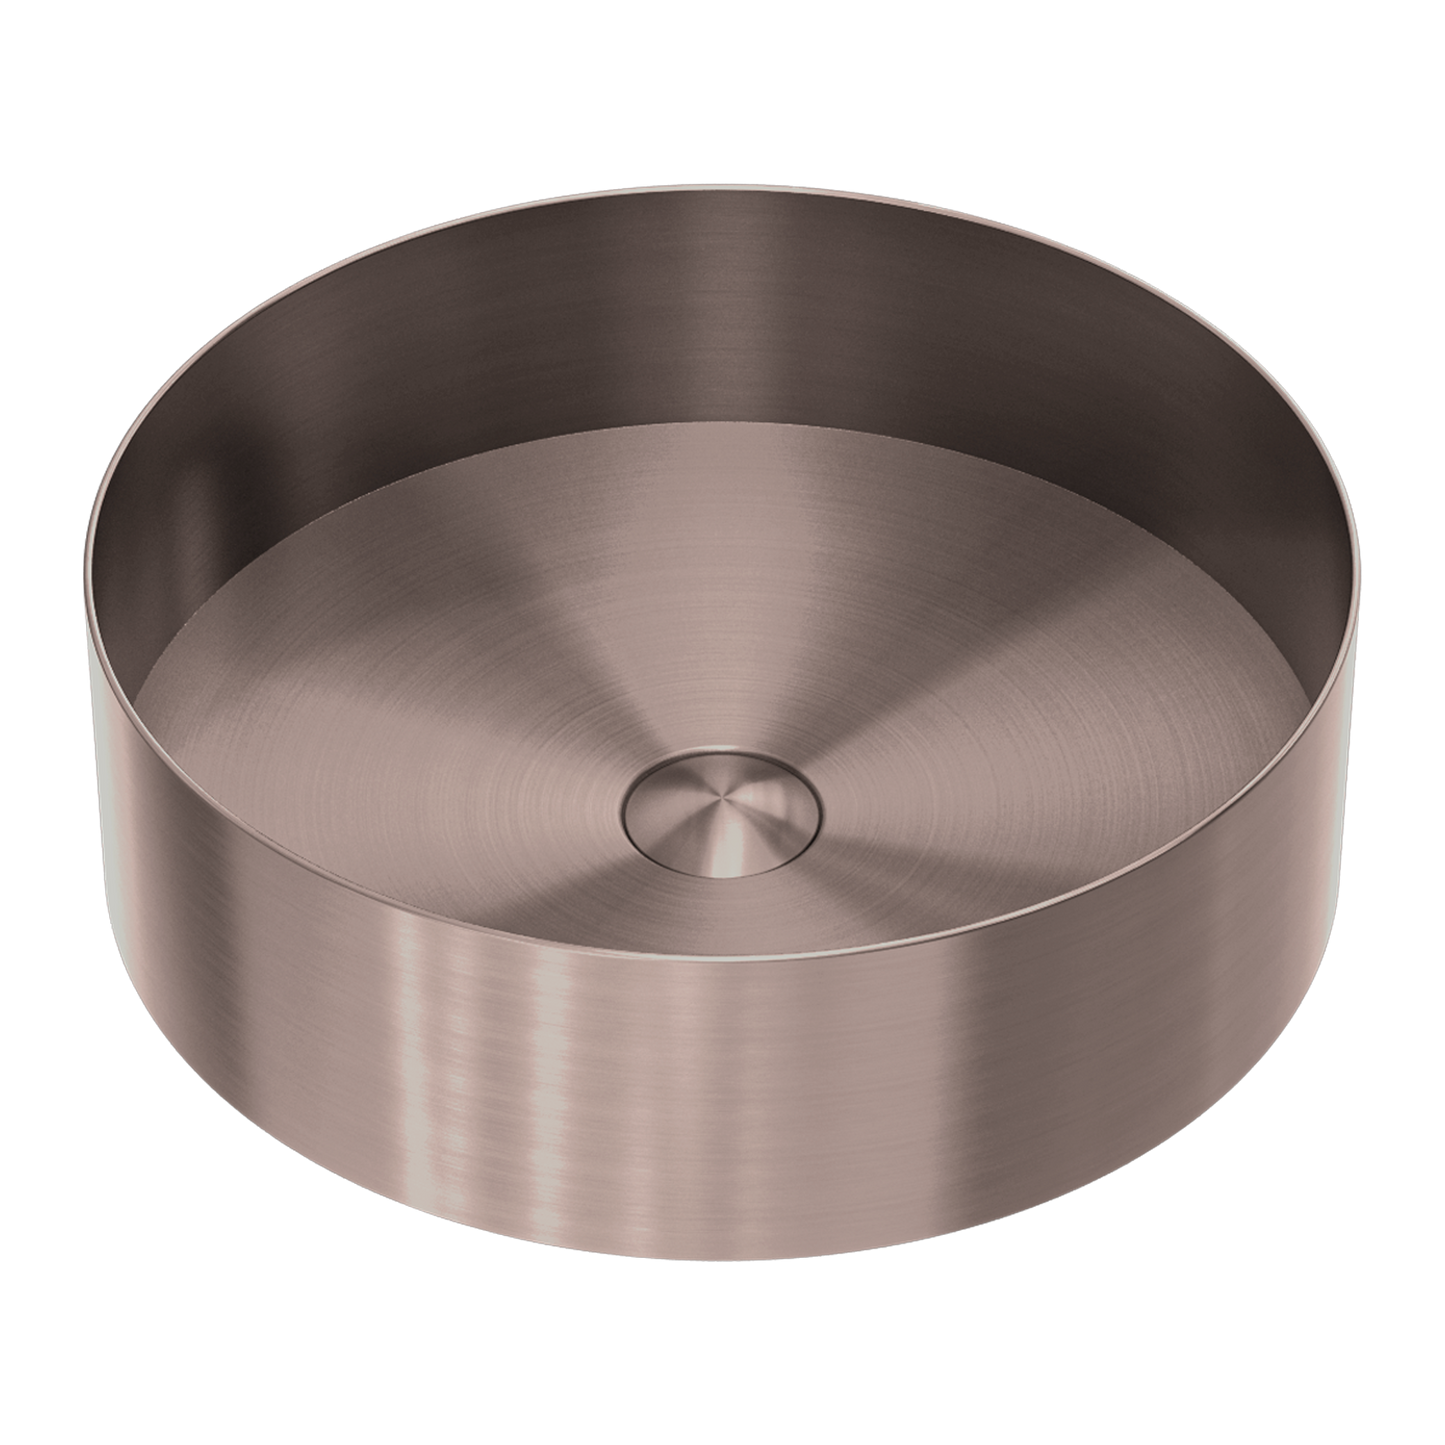 Opal Stainless Steel Round Counter Top Basin - Brushed Bronze with PVD Coating